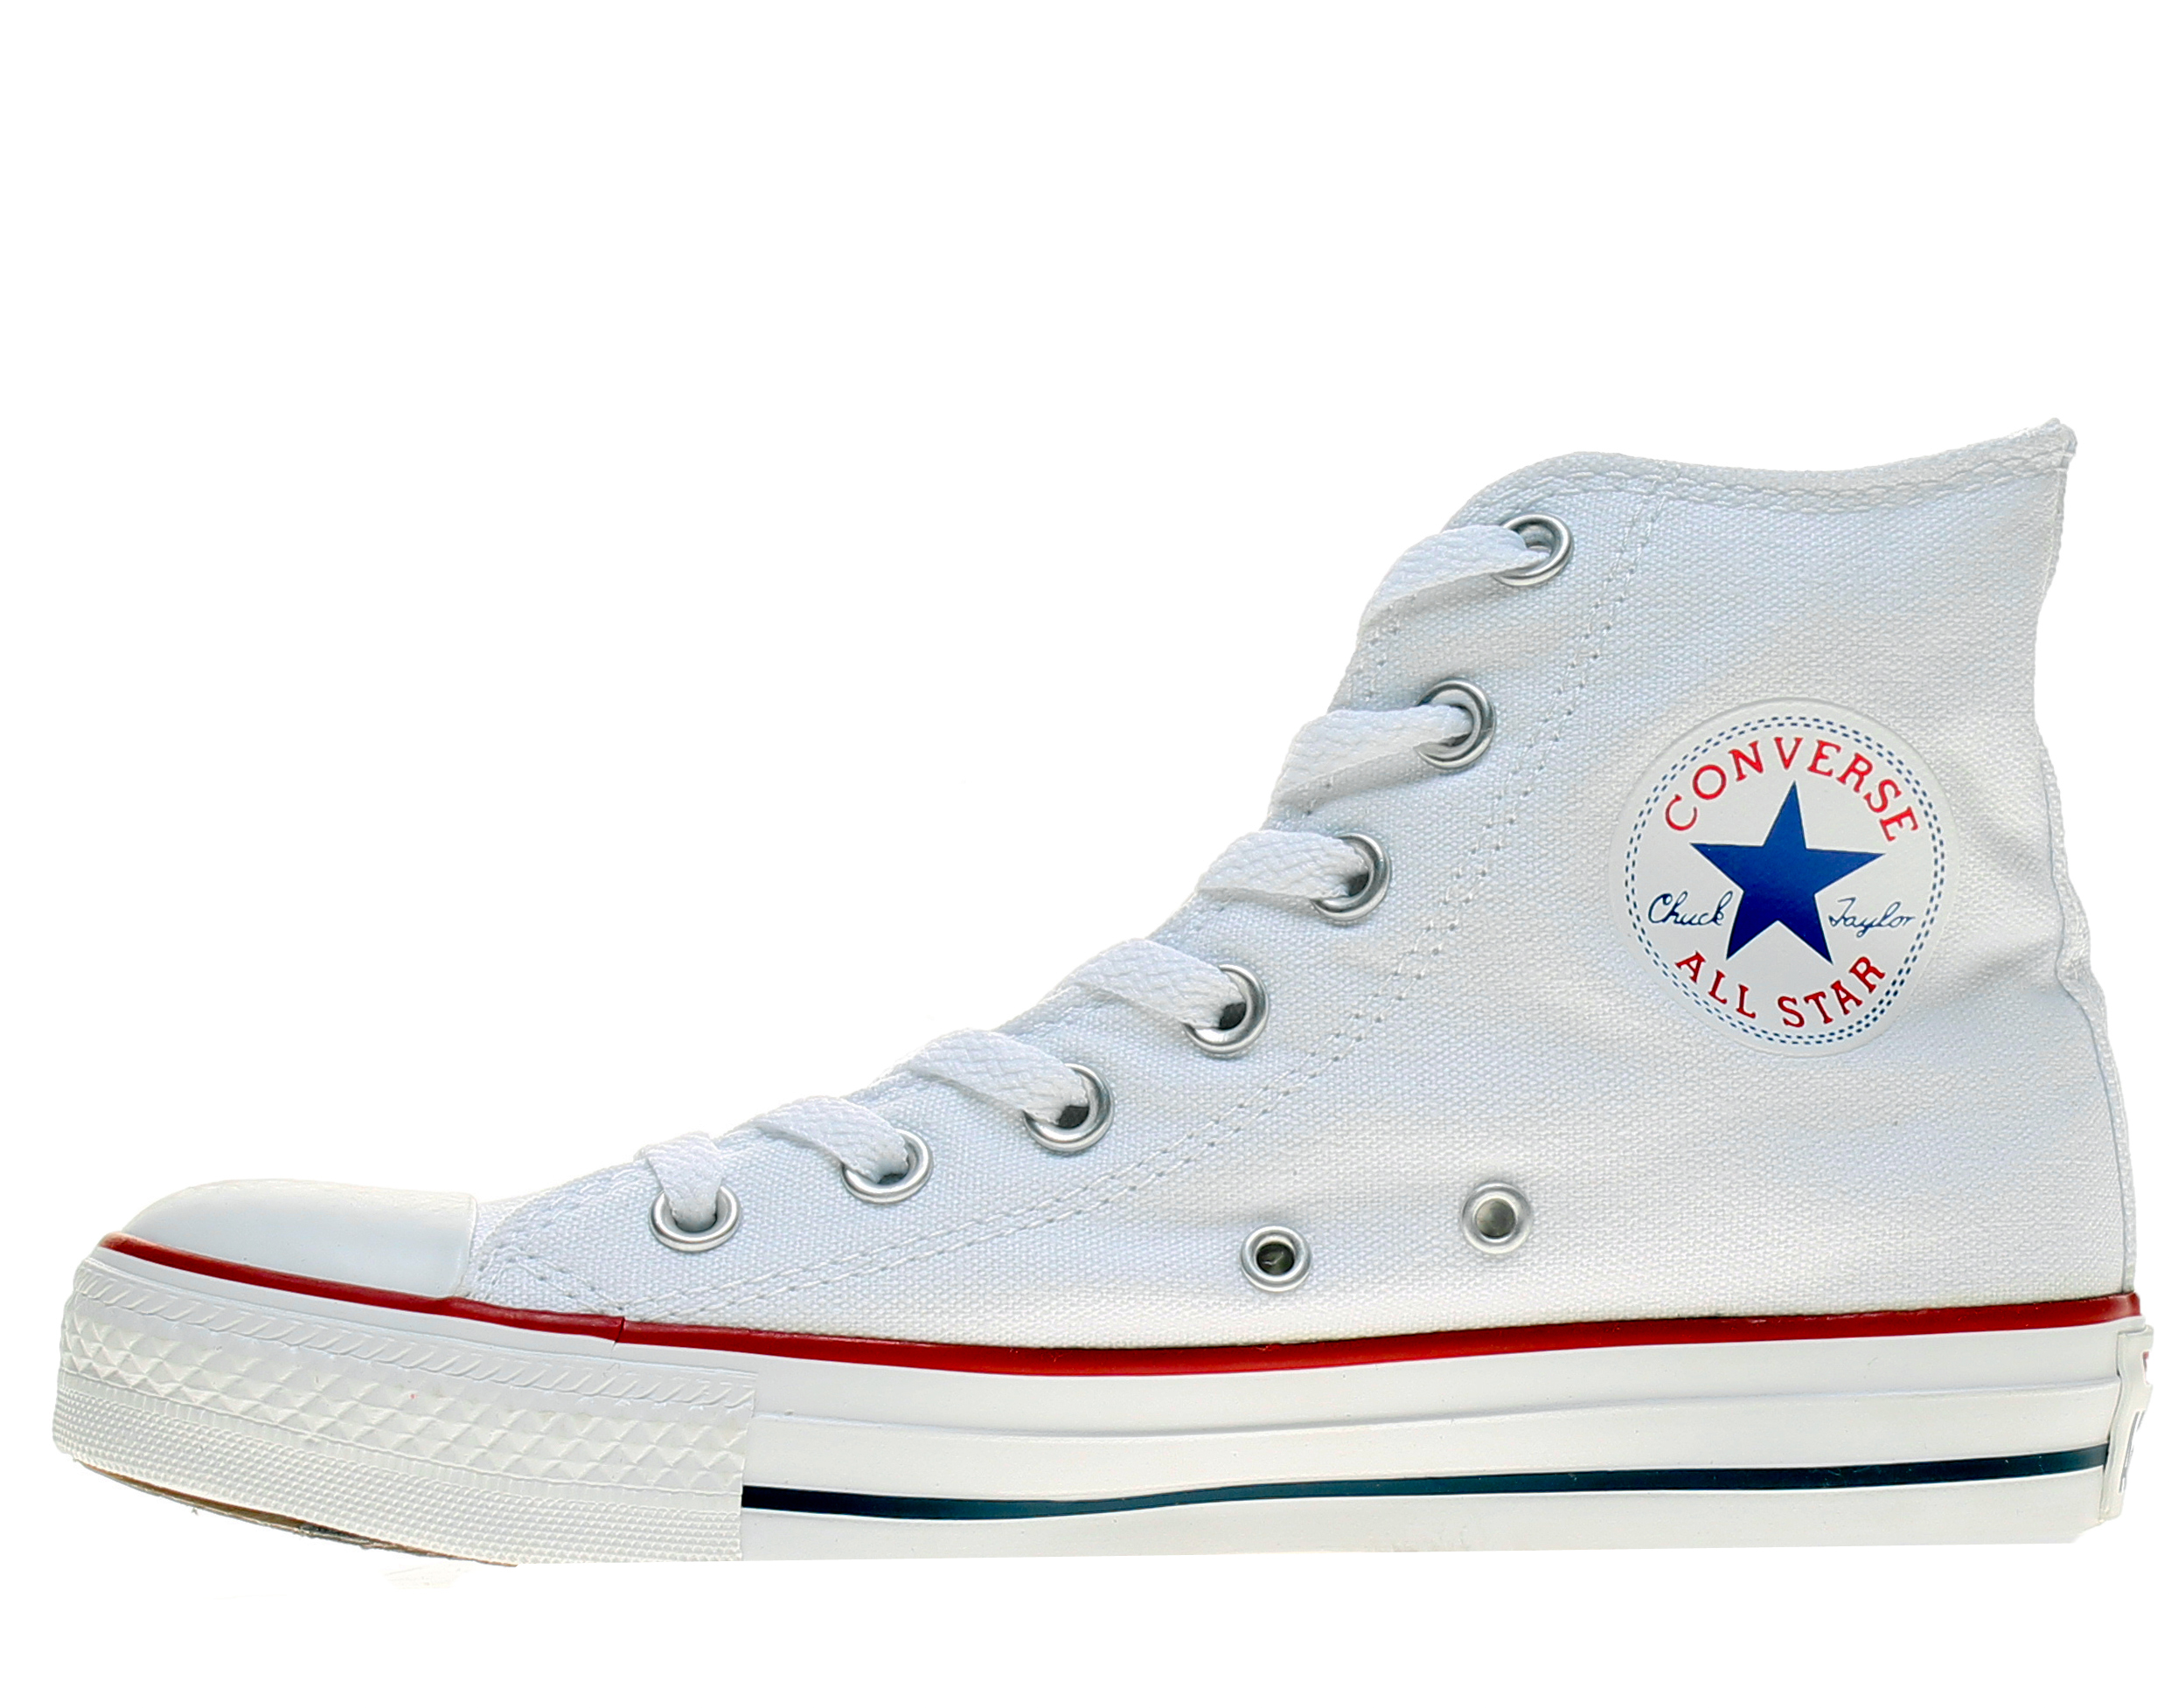 Converse Unisex Chuck Taylor All Star High Top - image 3 of 6